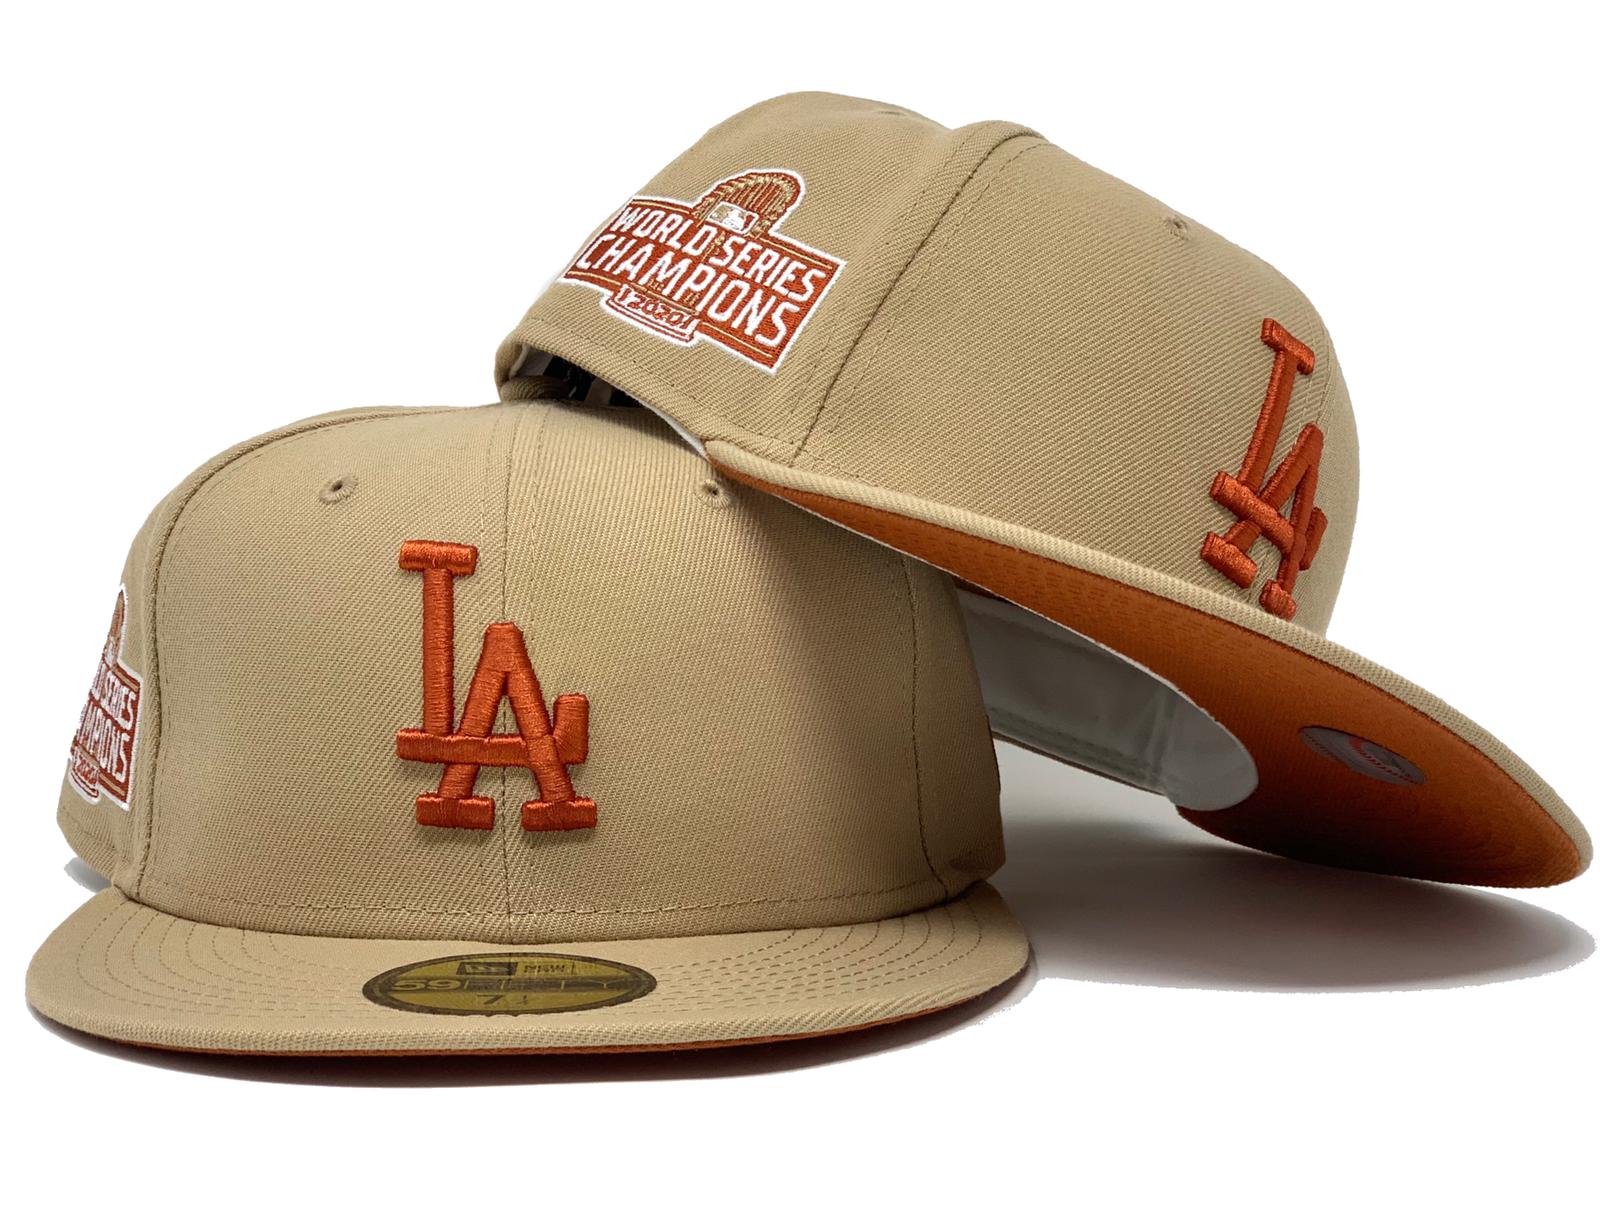 Dodgers Gold-Trimmed World Series Champions Cap Leaked